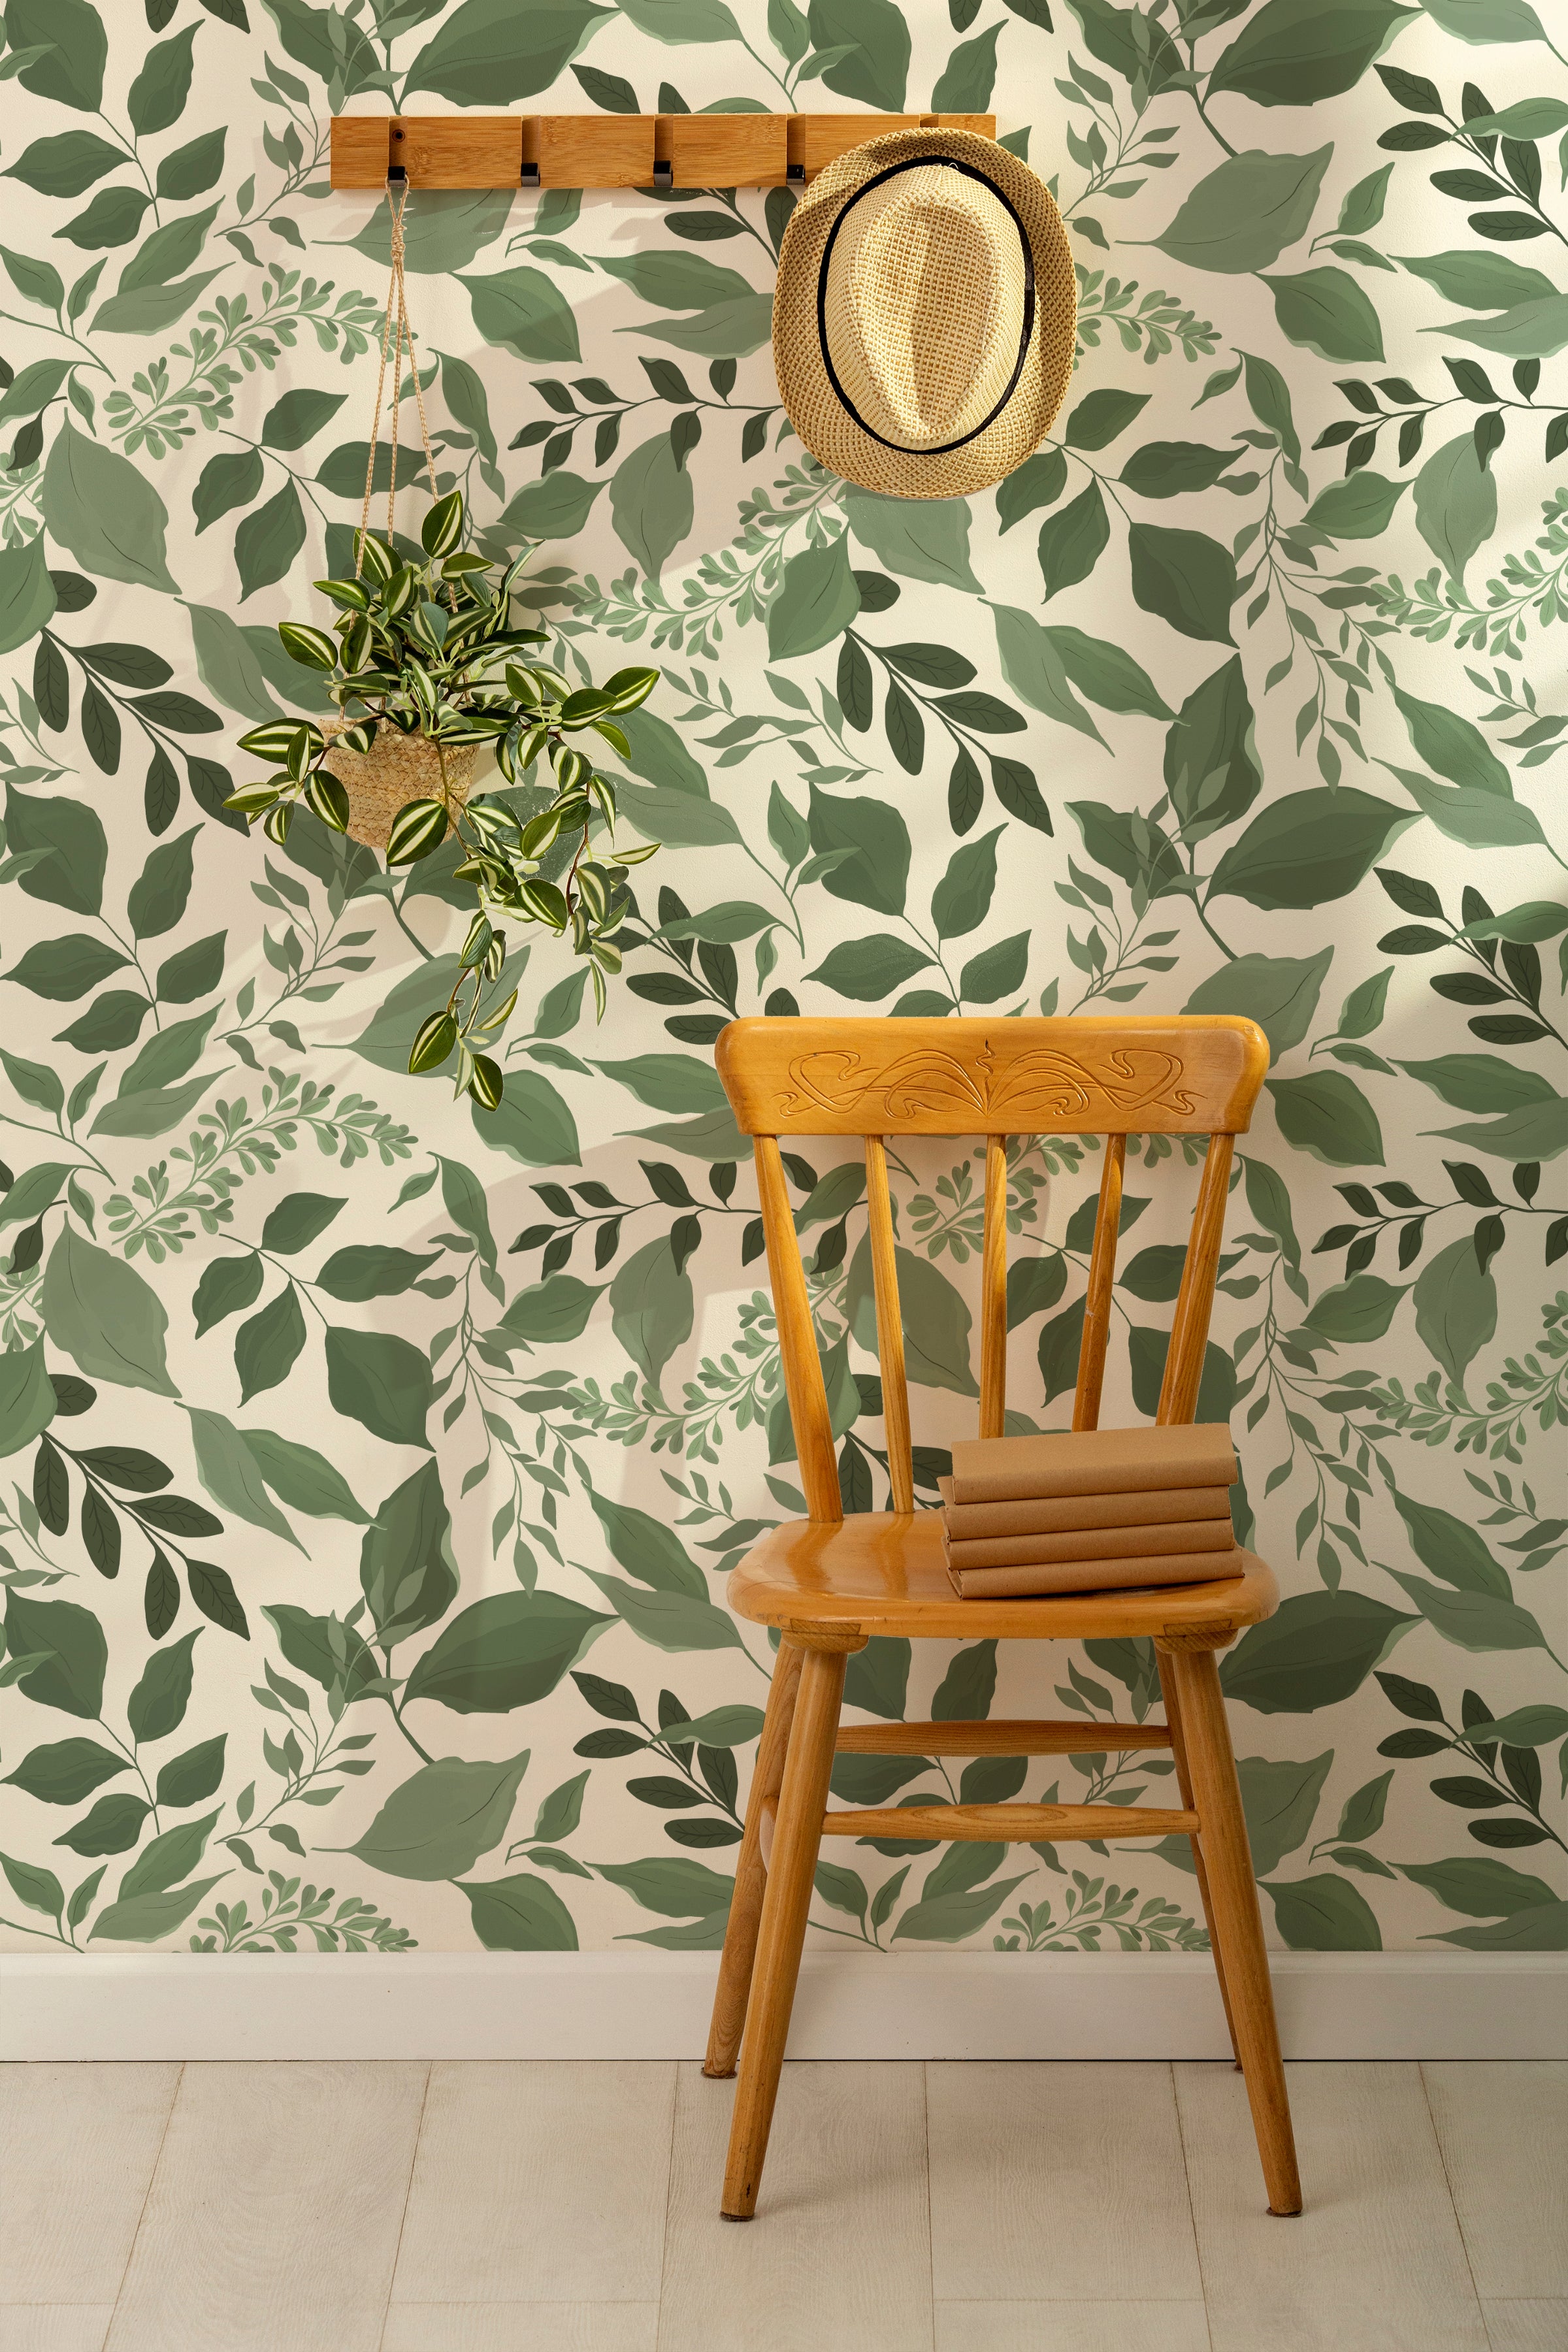 an interior scene with "Green Goddess Wallpaper." A single wooden chair with a woven hat hanging above it is set against the wallpaper, highlighting the room's natural aesthetic. A potted hanging plant with greenery that complements the wallpaper adds a three-dimensional element to the space.